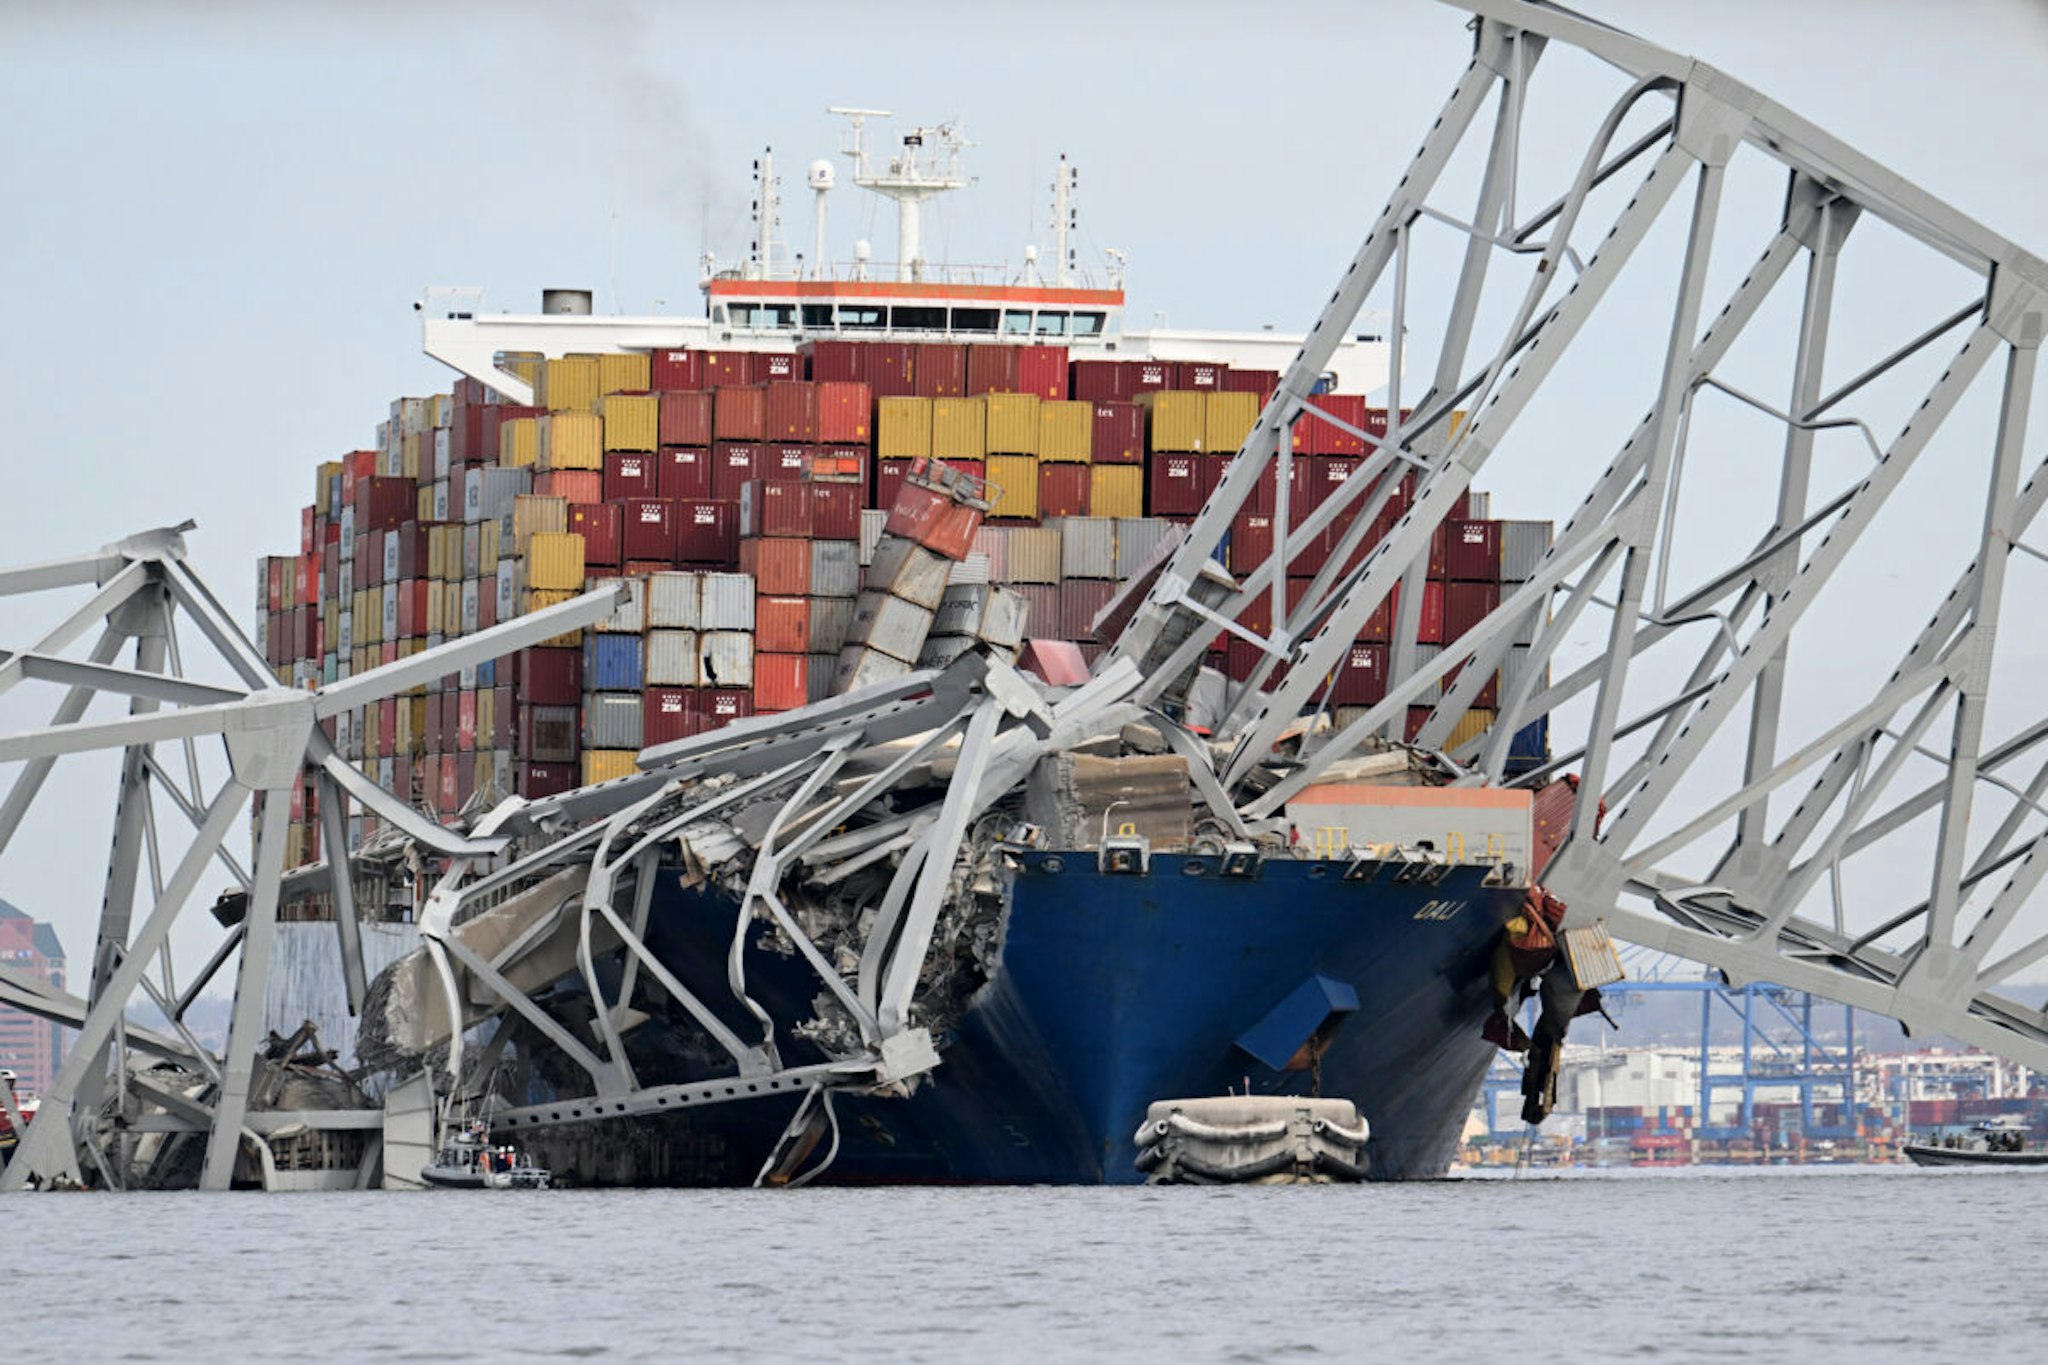 TOPSHOT - The steel frame of the Francis Scott Key Bridge sits on top of the container ship Dali after the bridge collapsed, Baltimore, Maryland, on March 26, 2024. The bridge collapsed early March 26 after being struck by the Singapore-flagged Dali, sending multiple vehicles and people plunging into the frigid harbor below. There was no immediate confirmation of the cause of the disaster, but Baltimore's Police Commissioner Richard Worley said there was "no indication" of terrorism.